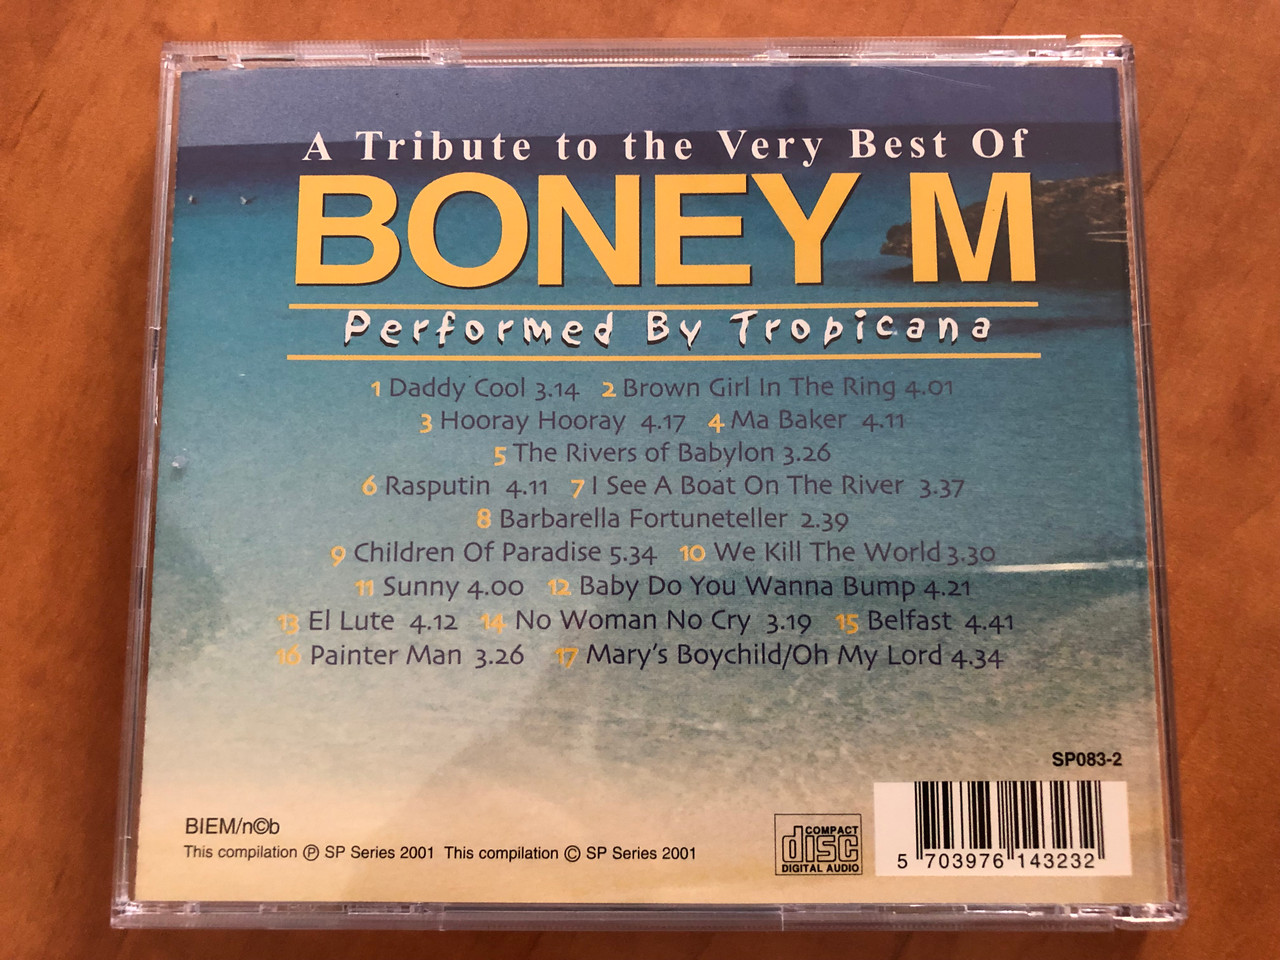 https://cdn10.bigcommerce.com/s-62bdpkt7pb/products/30770/images/181683/A_Tribute_To_The_Very_Best_Of_Boney_M_-_Performed_by_Tropicana_Featuring_Daddy_Cool_Rasputin_The_Rivers_Of_Babylon_Ma_Baker_Brown_Girl_In_The_Ring_SP_Series_Audio_CD_2001_SP083-2_4__74673.1623827692.1280.1280.JPG?c=2&_ga=2.210445589.1829284140.1623917769-62128686.1623917769